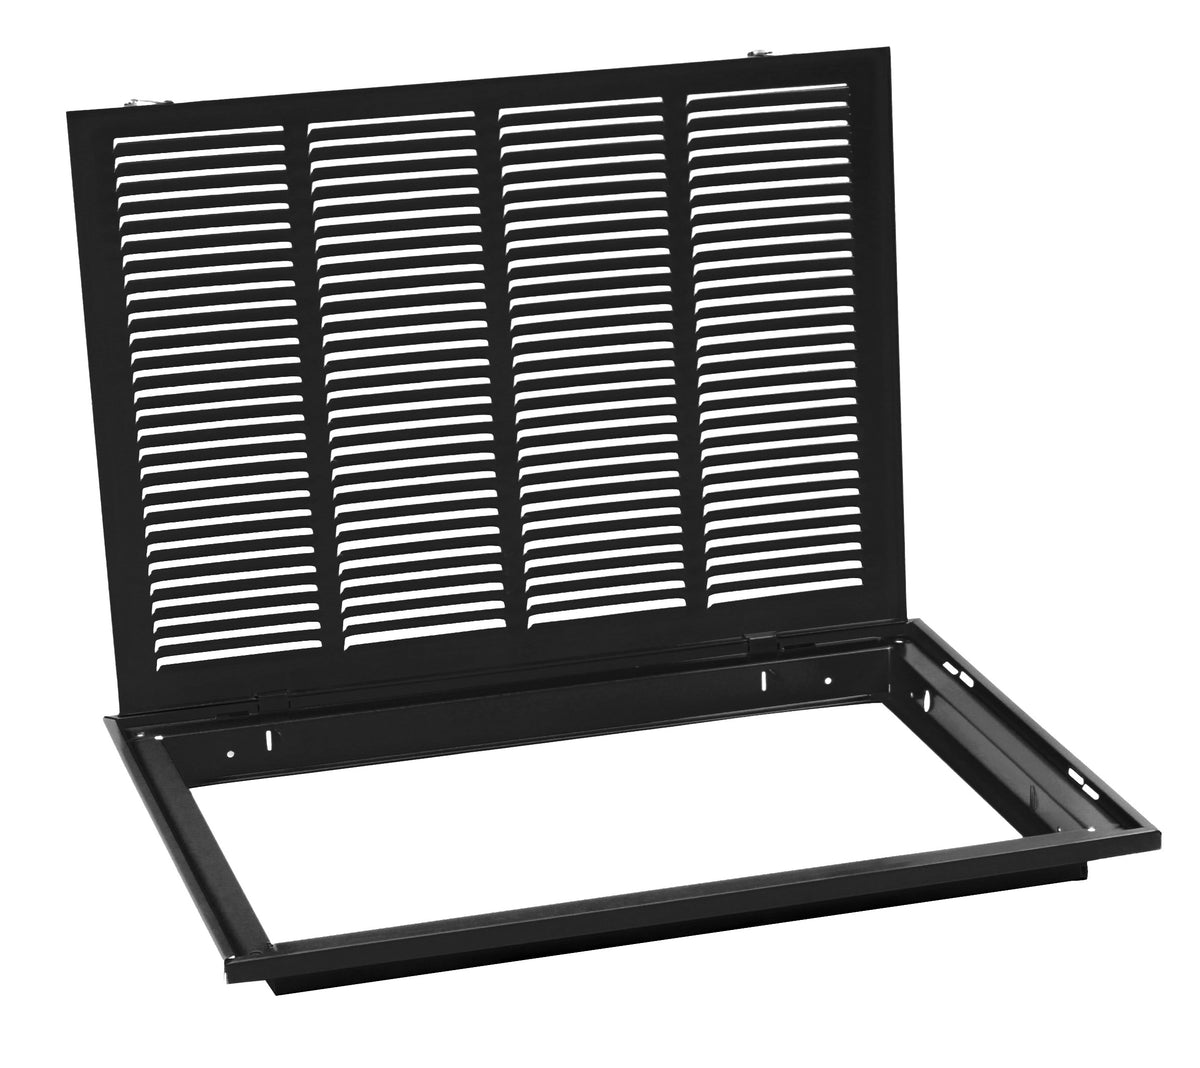 20&quot; X 16&quot; Steel Return Air Filter Grille for 1&quot; Filter - Removable Frame - Black - [Outer Dimensions: 22 5/8&quot; X 18 5/8&quot;]